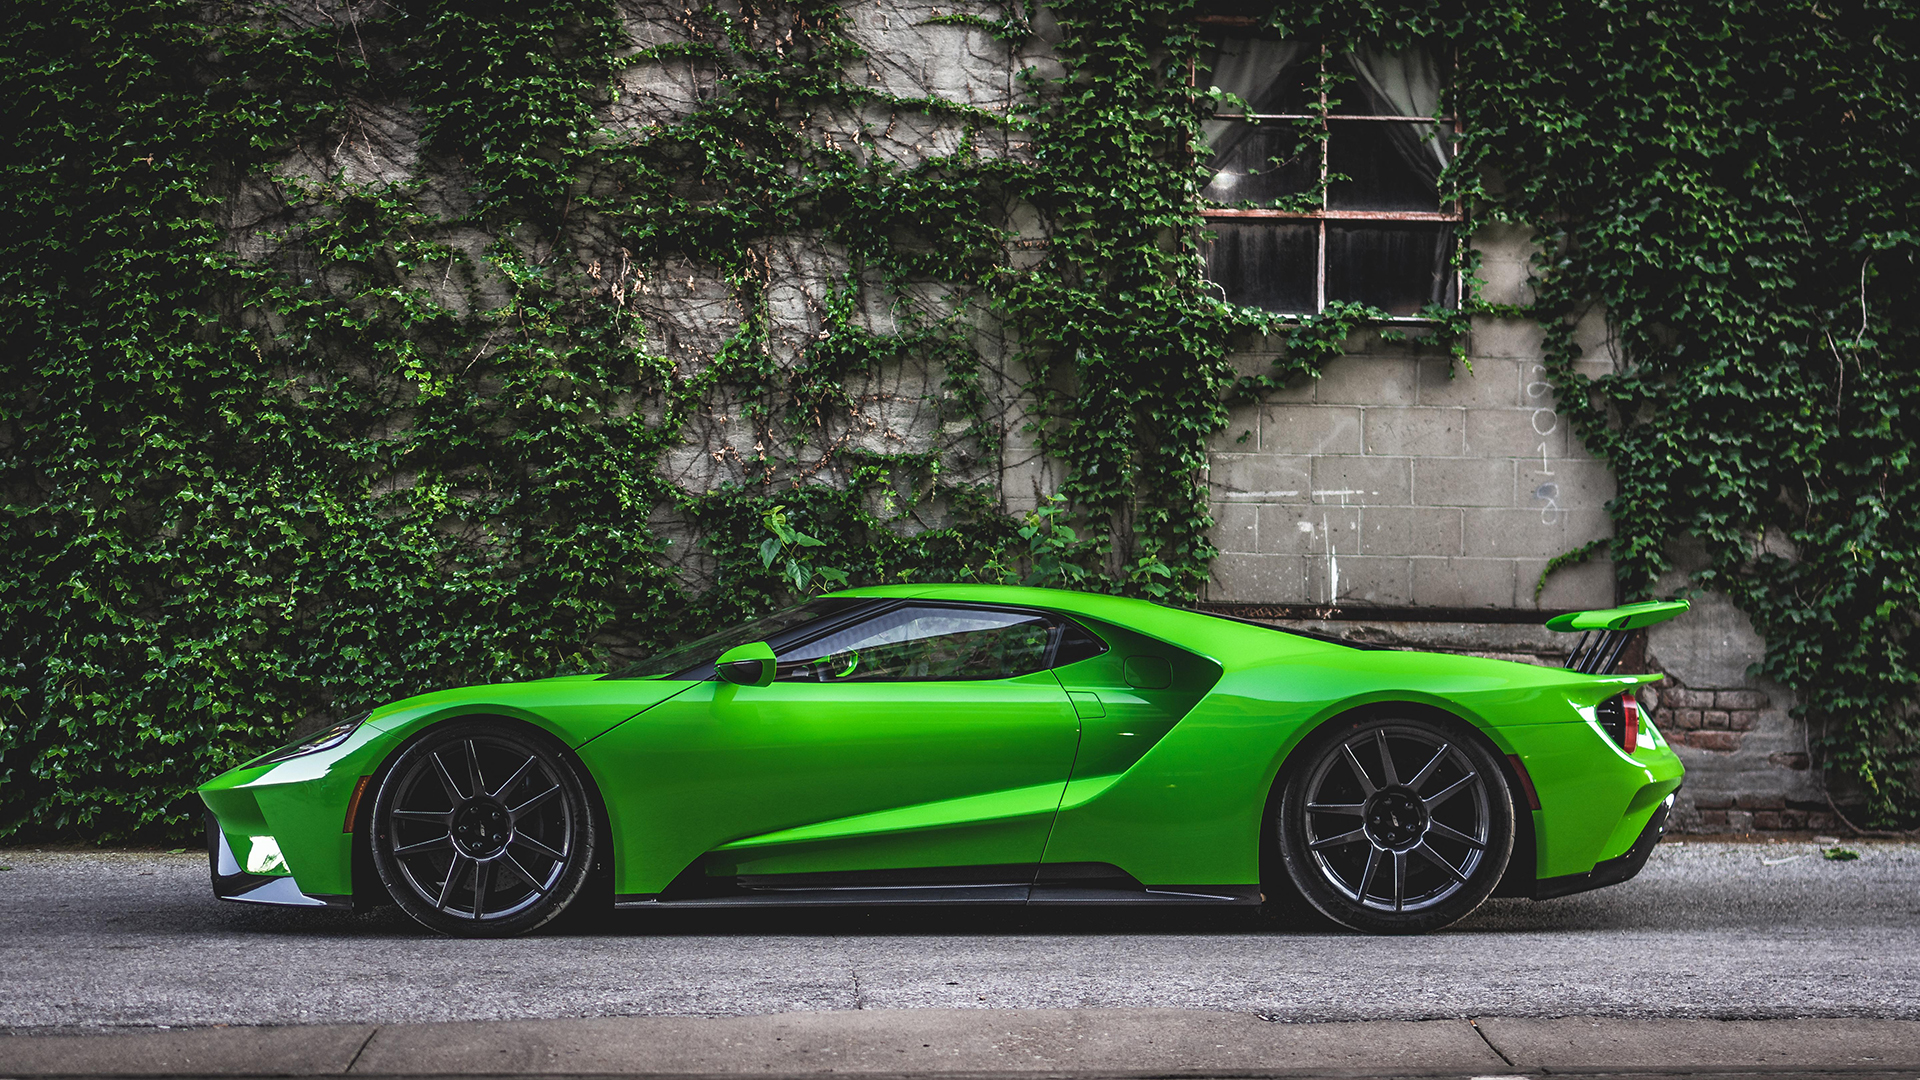 Photography Car 2017 Ford GT Side View 2017 Year Green Cars 1920x1080